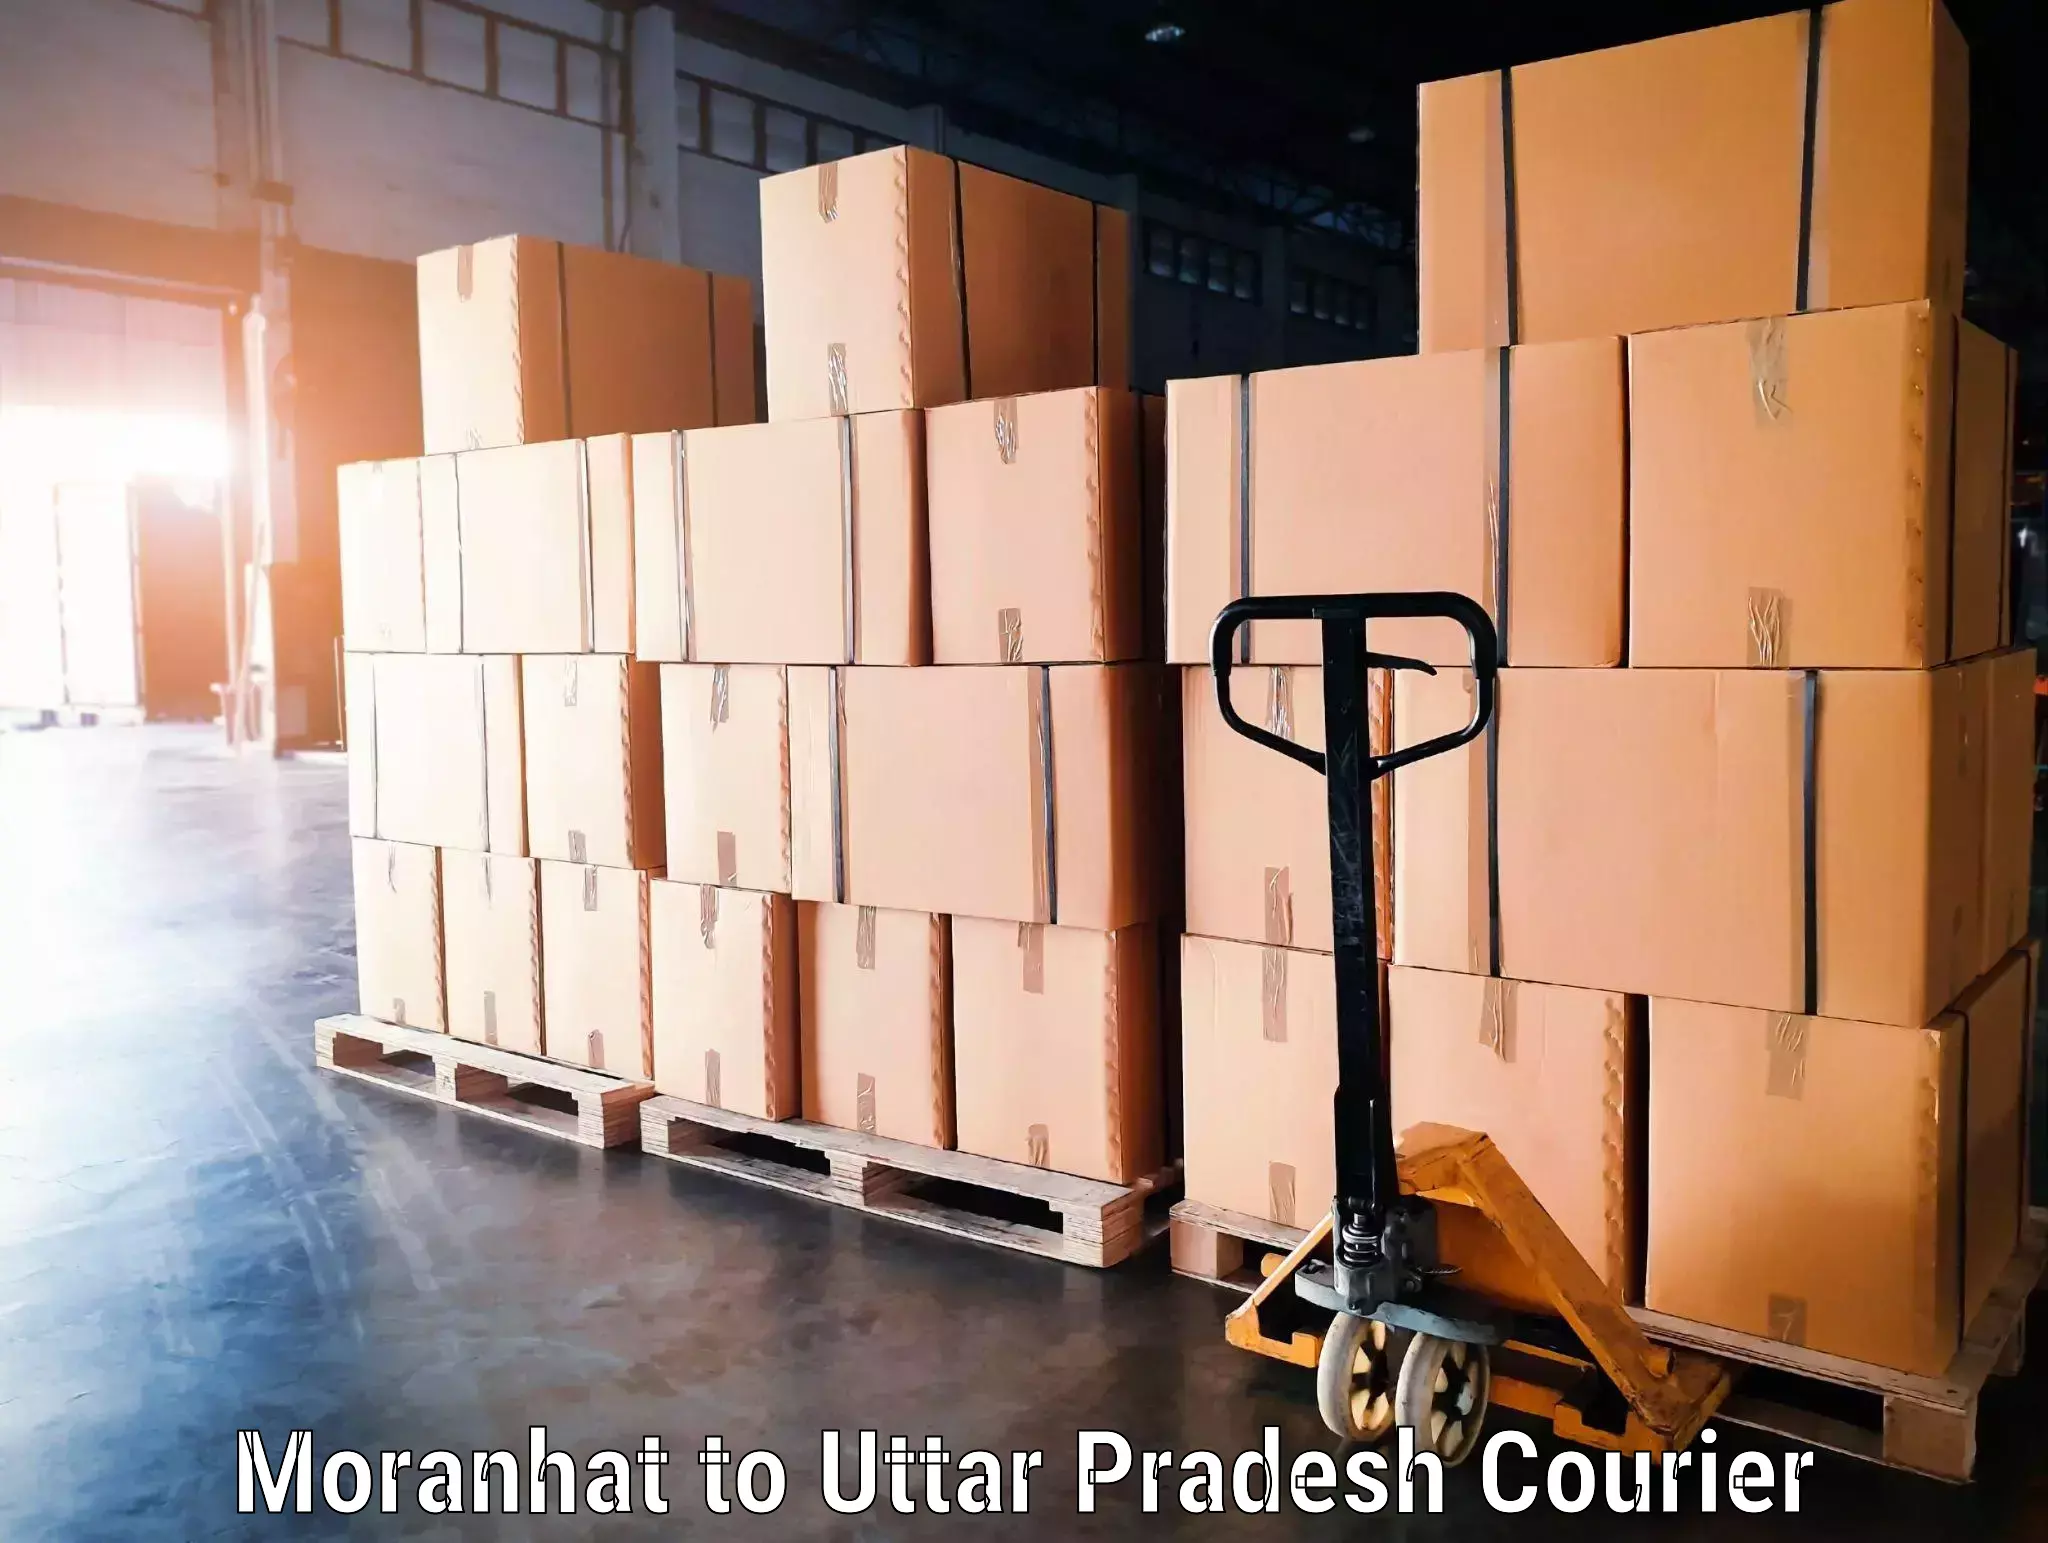 Luggage shipment tracking Moranhat to Sultanpur